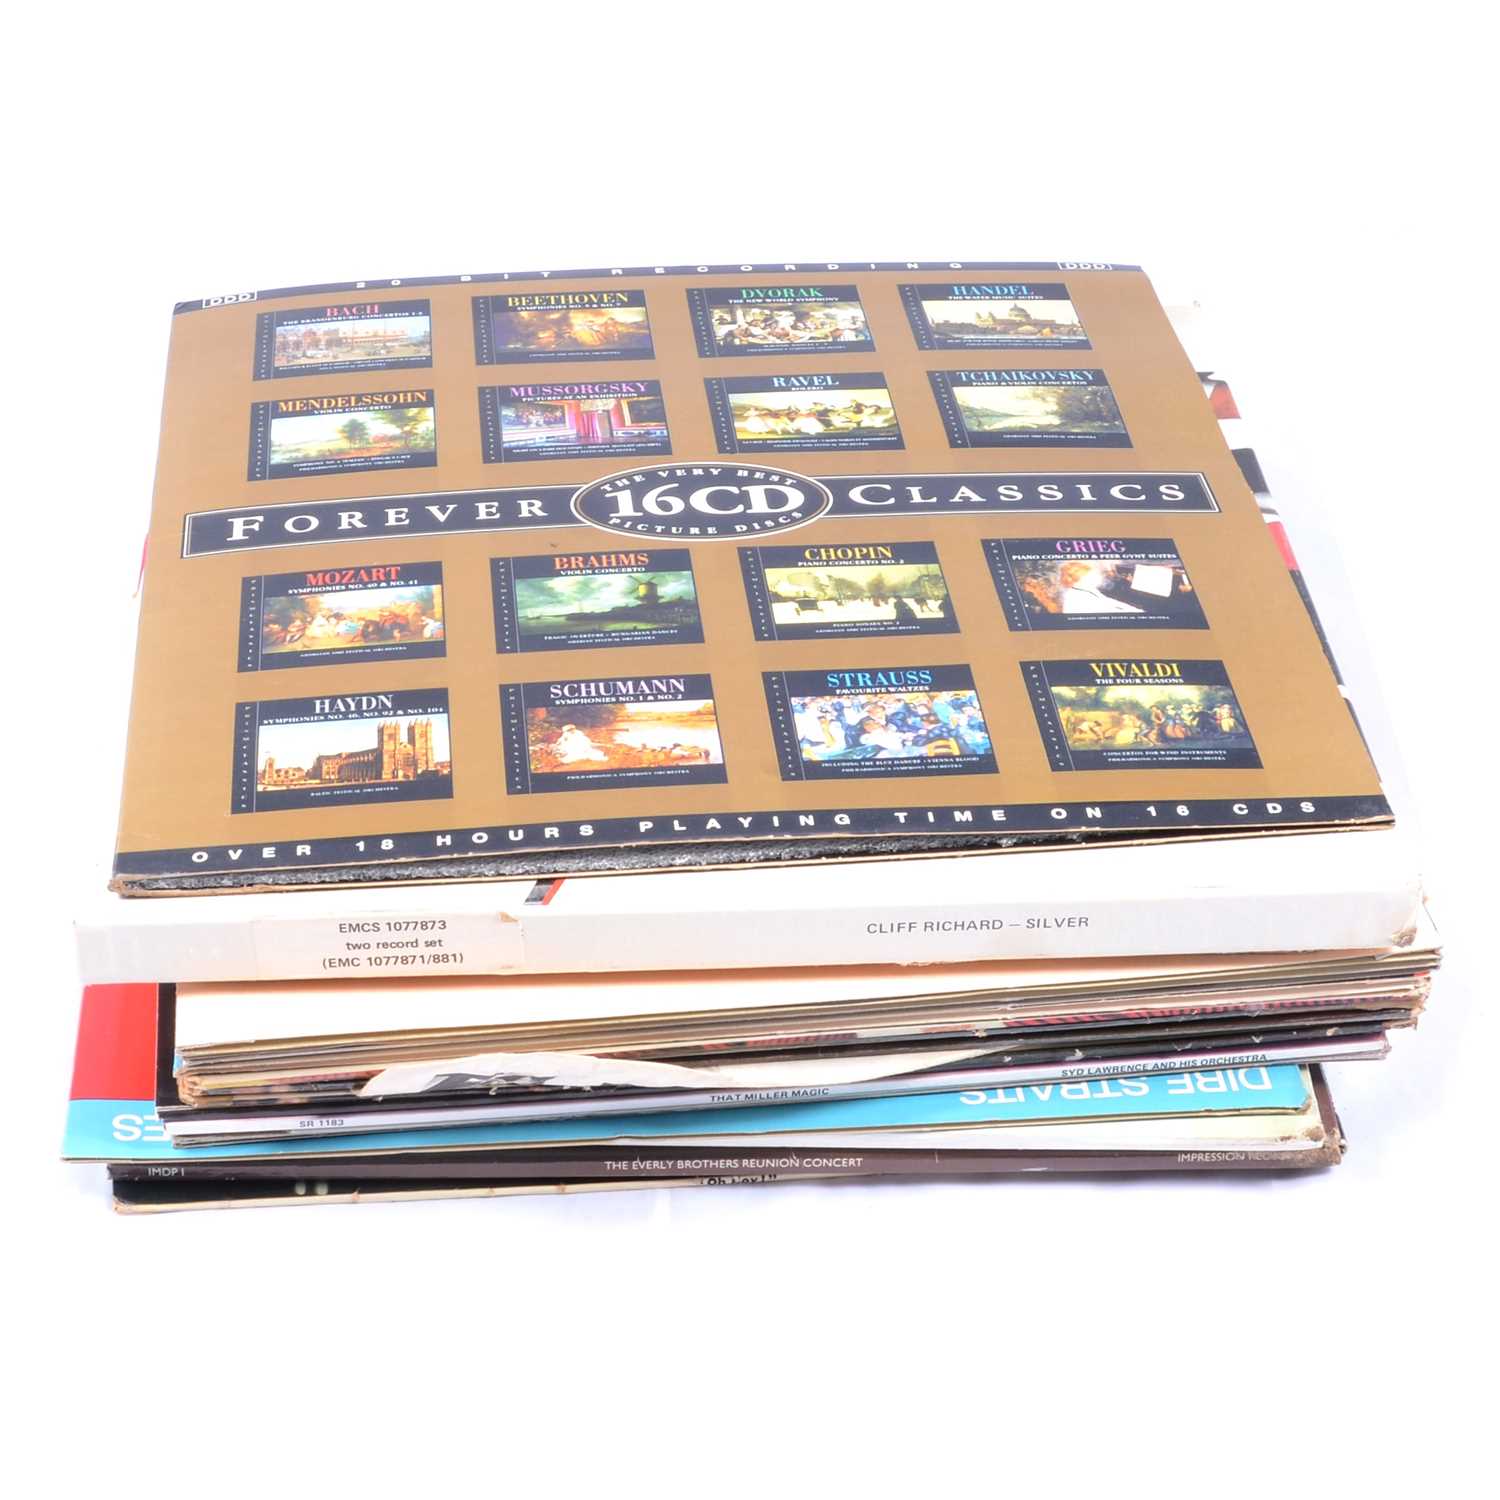 Approximately one-hundred and thirty LP vinyl records, mostly classical and compilation